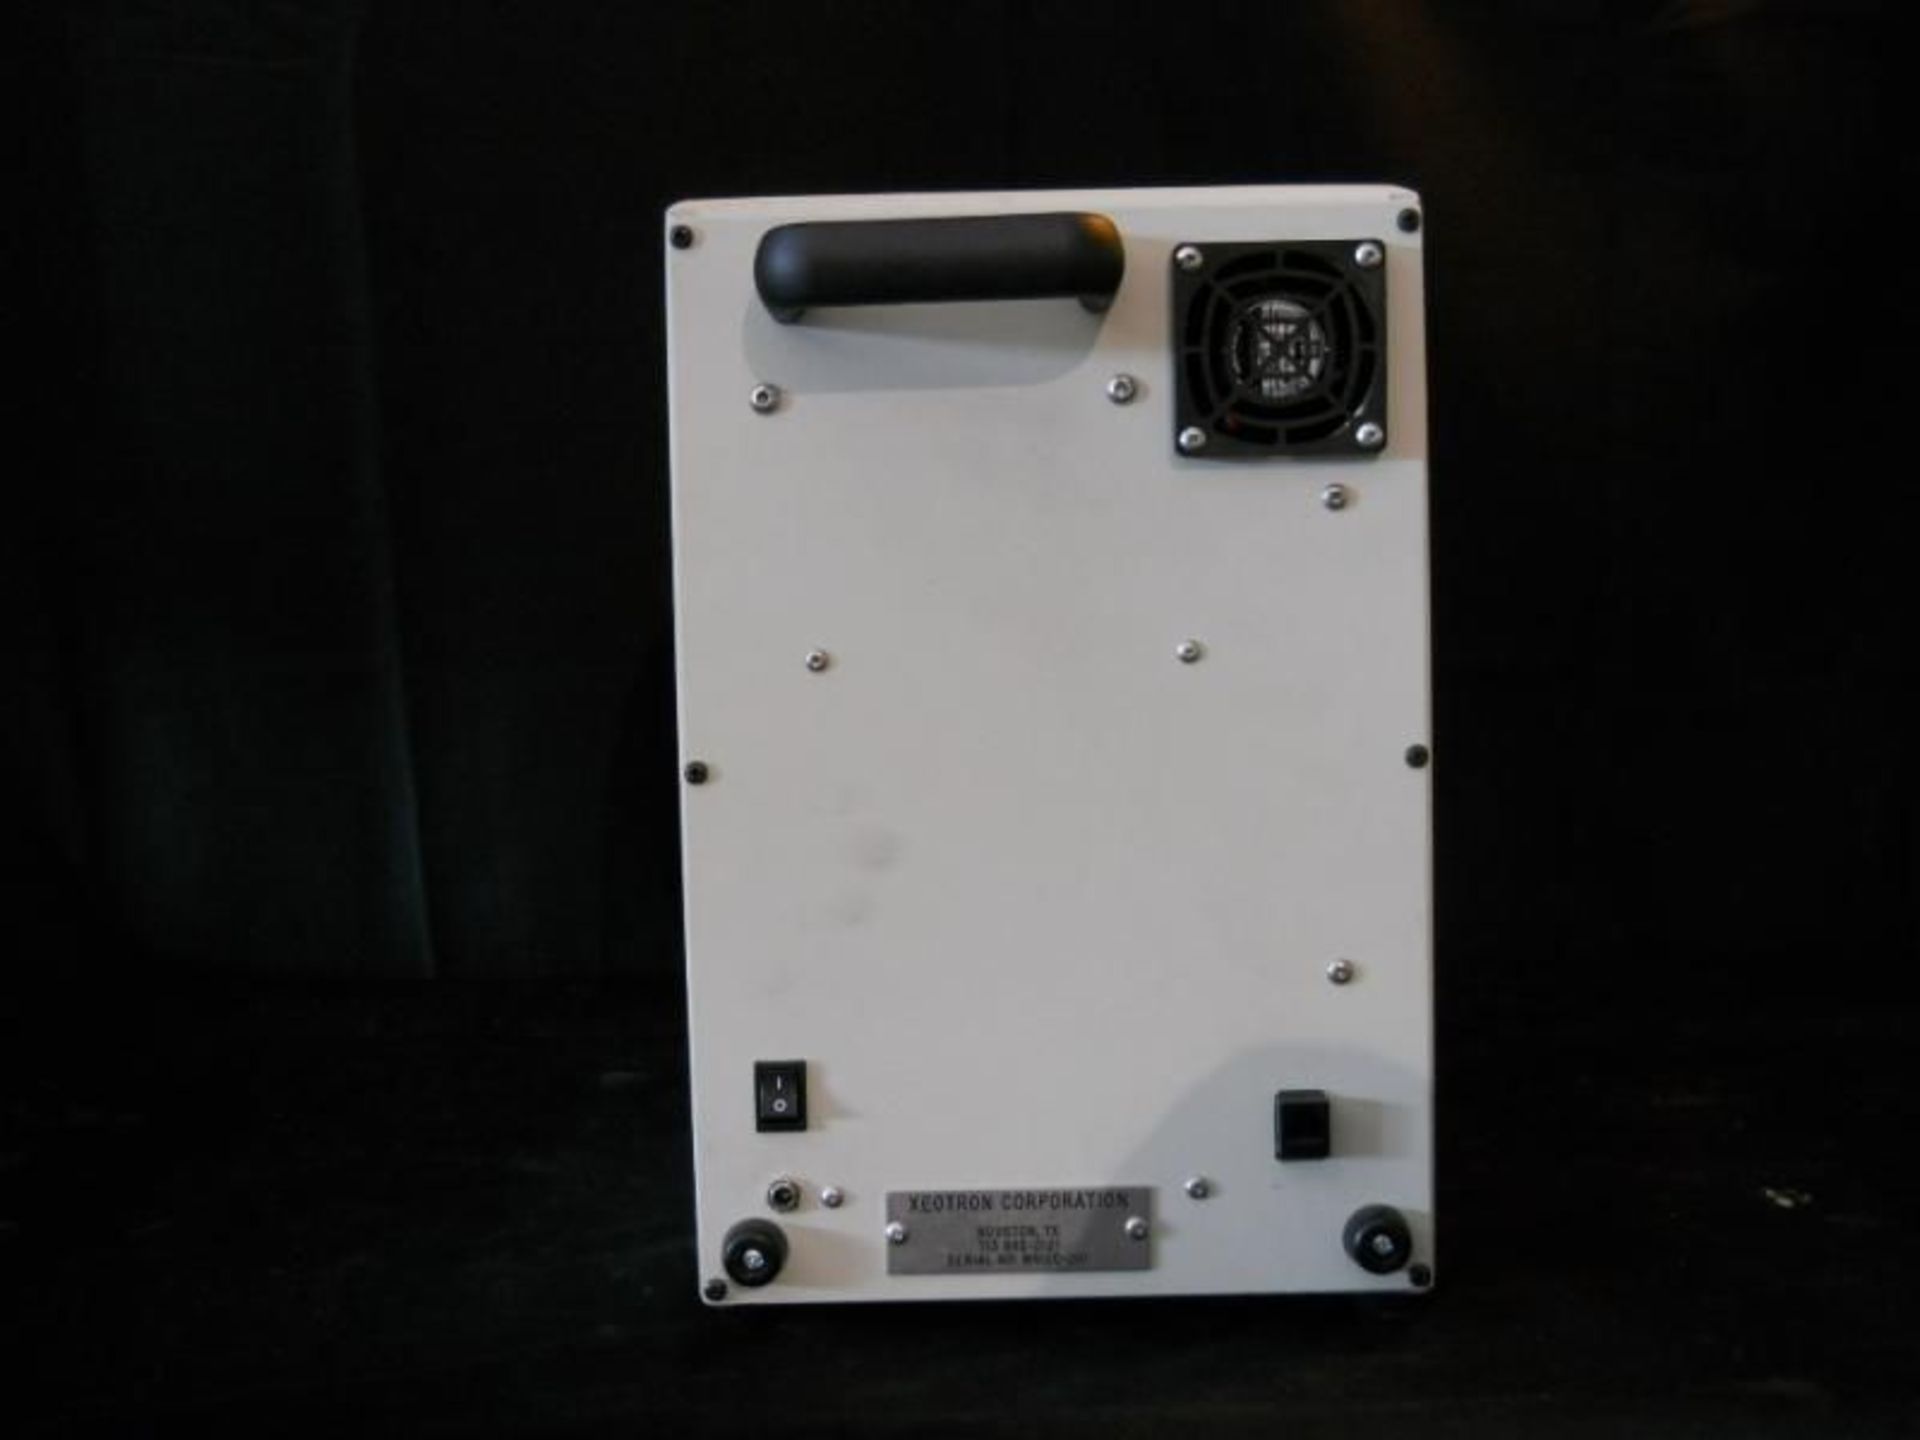 Xeotron Hybridization Station On-Chip PCR System (For Parts), Qty 1, 221255401810 - Image 6 of 8